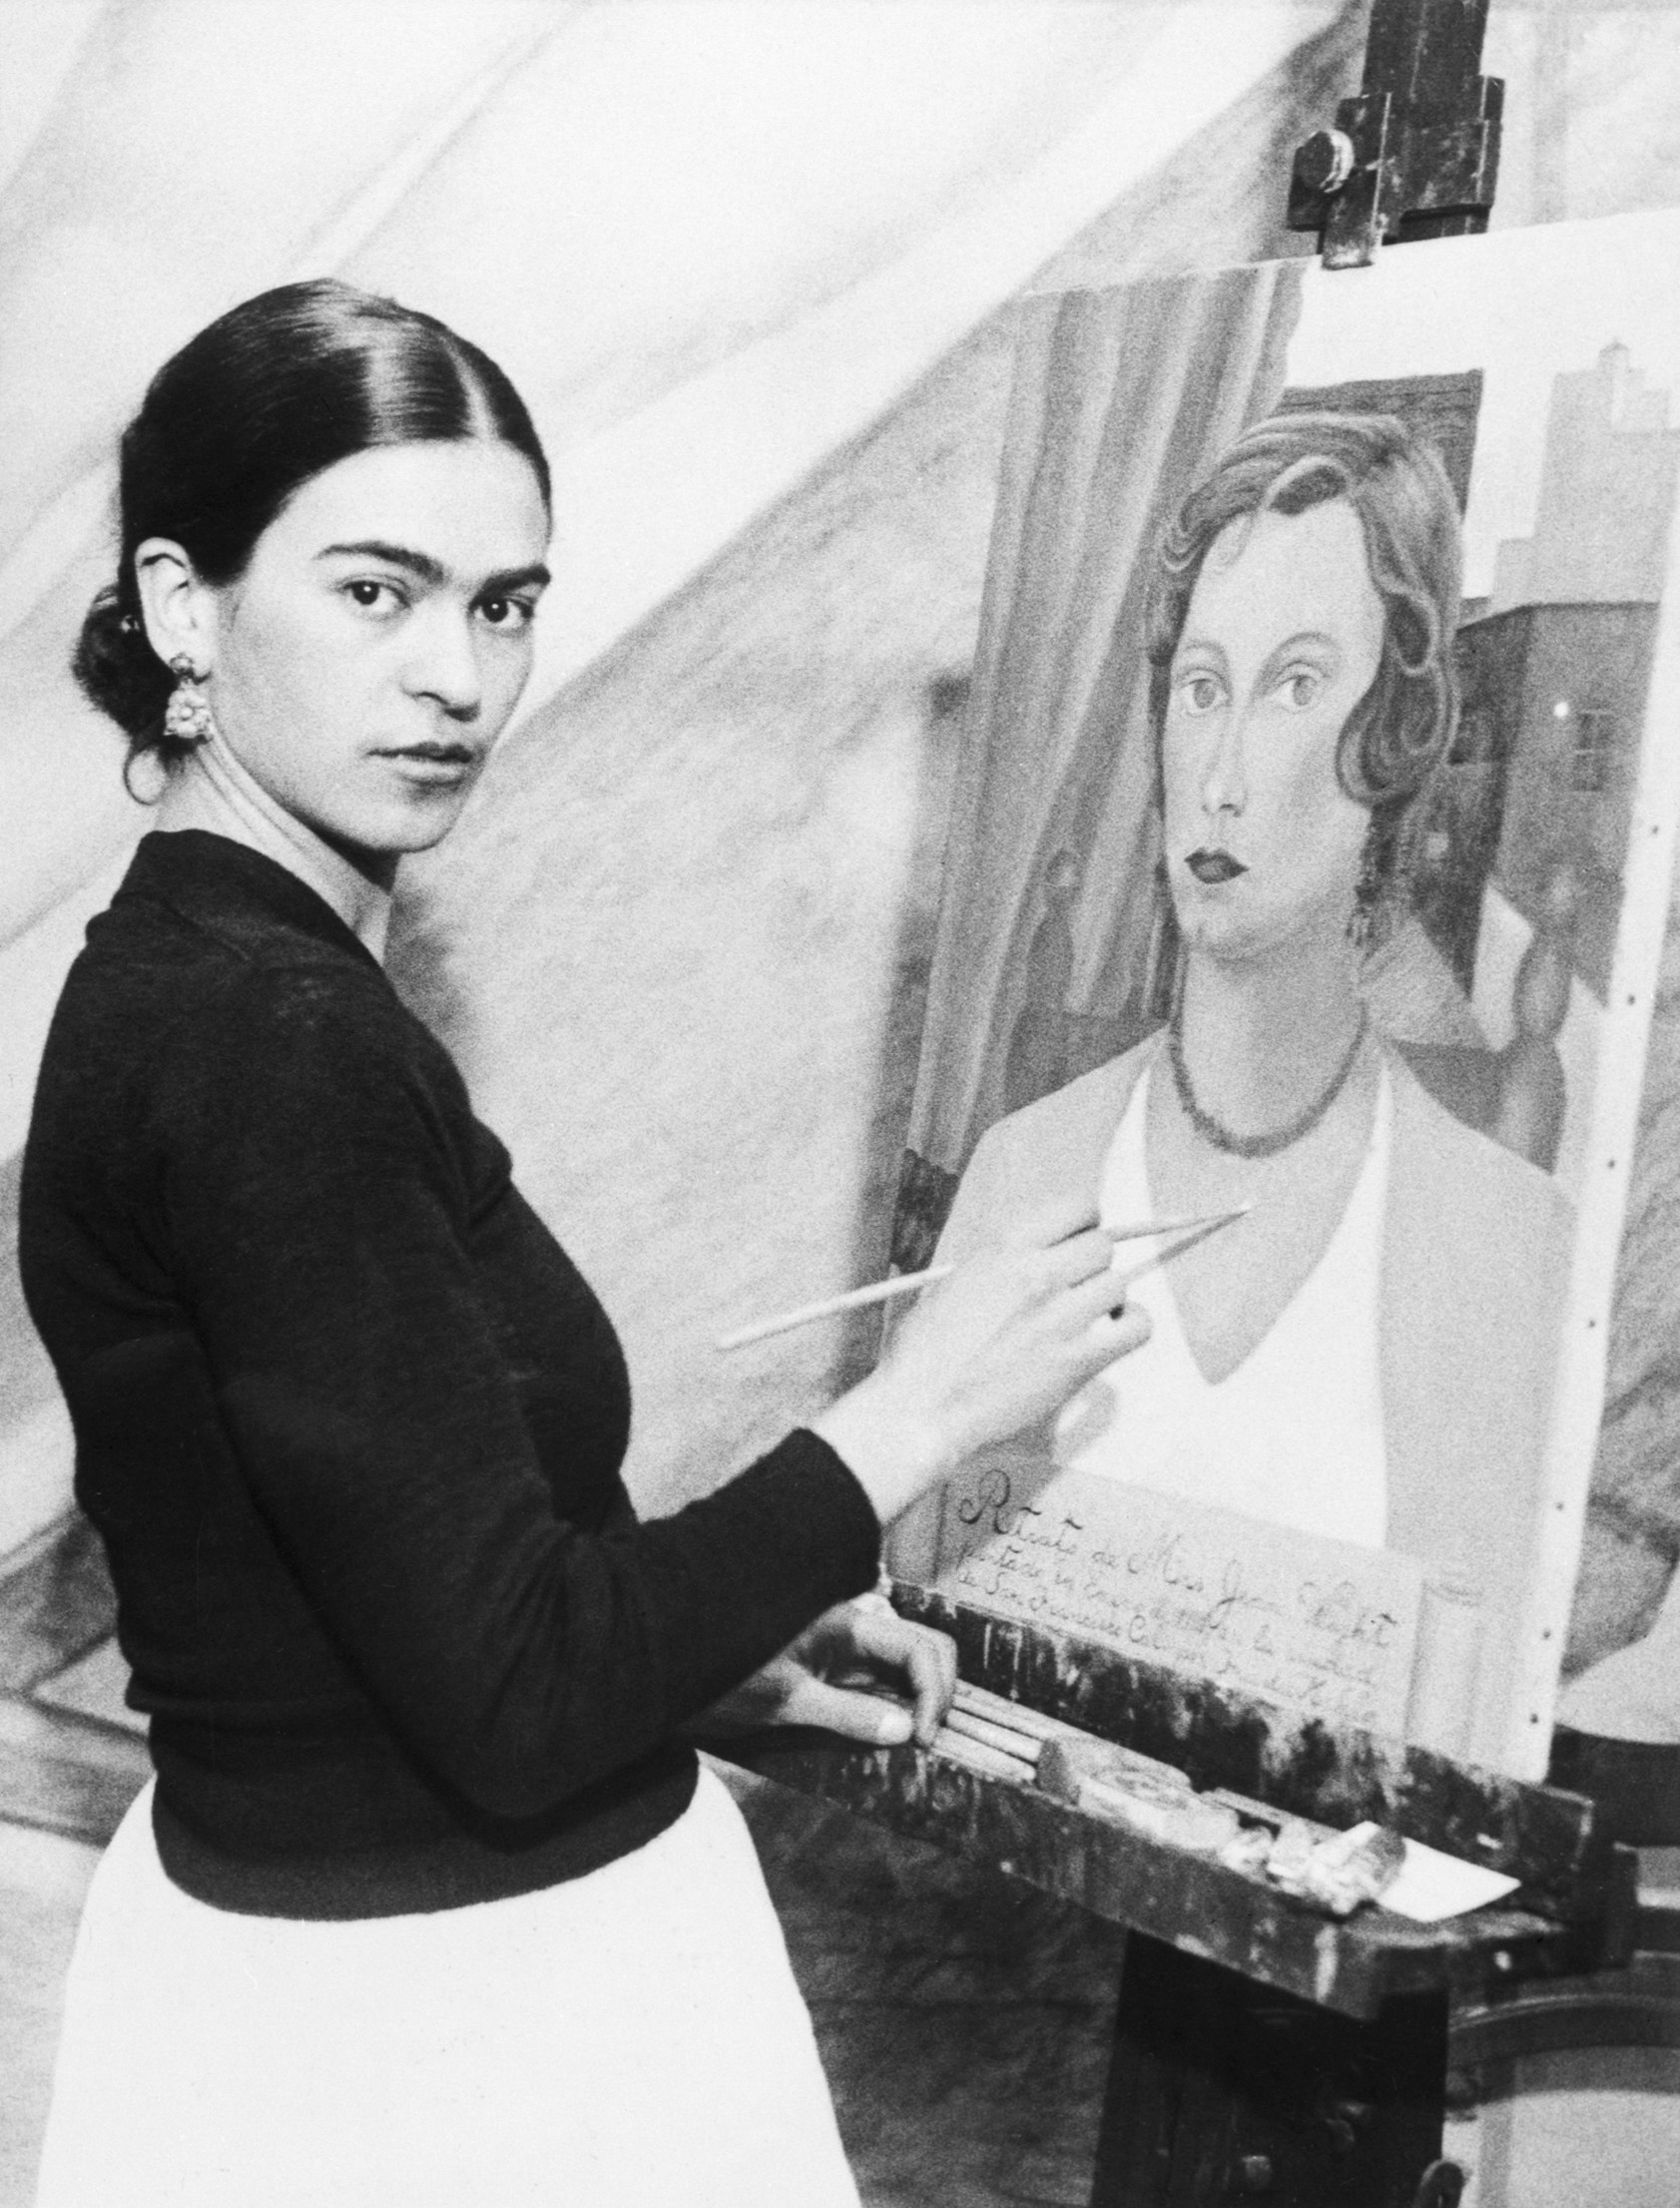 Photo shows Frida Kahlo painting a mural